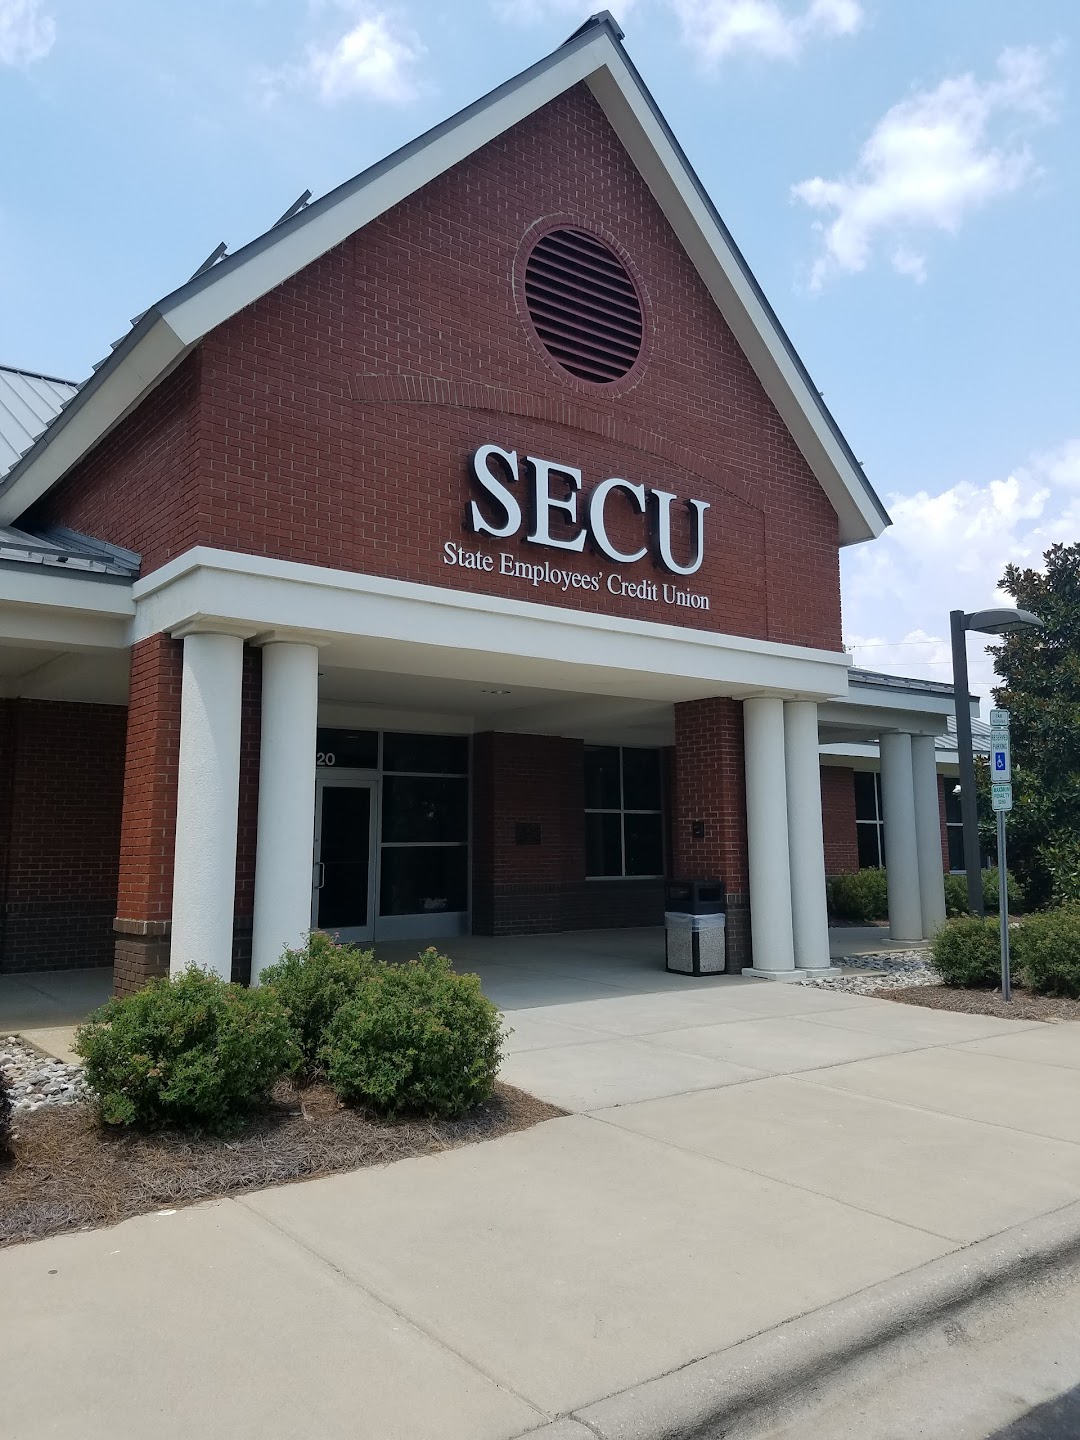 State Employees Credit Union